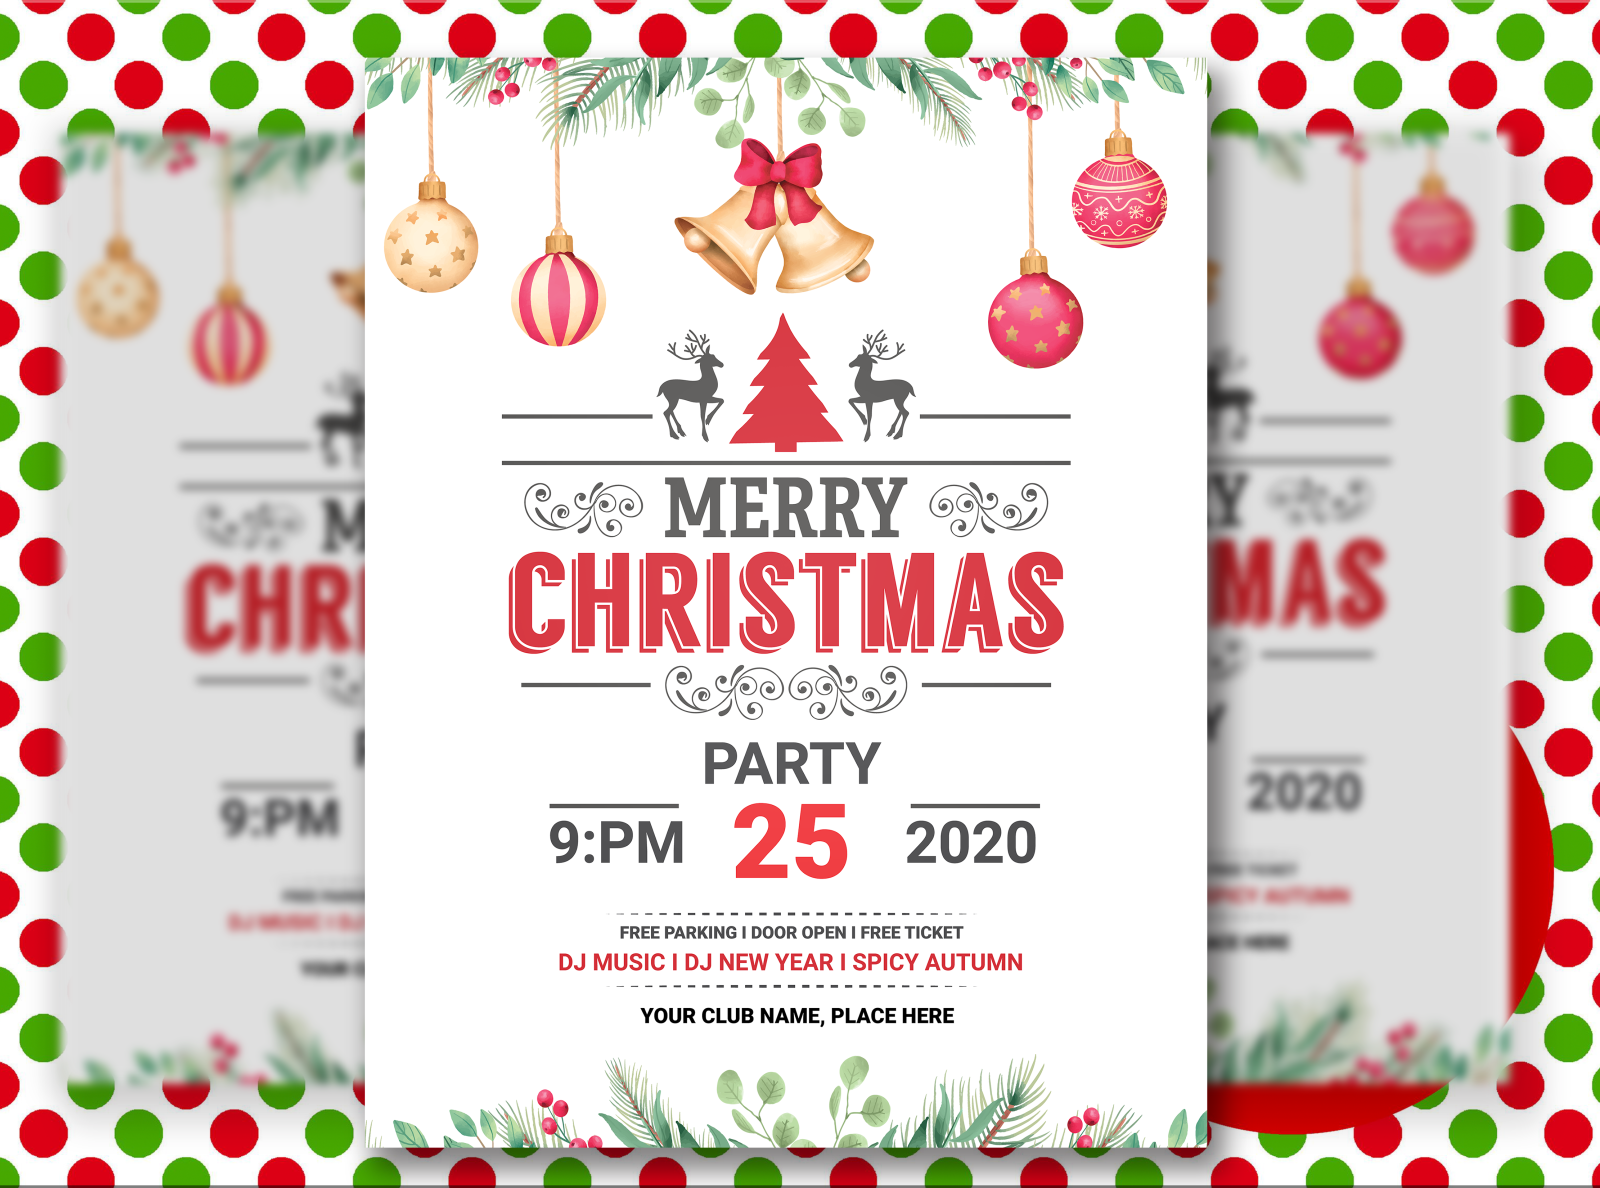 Christmas Special Flyer/Poster-Design by Abrar Shakil on Dribbble